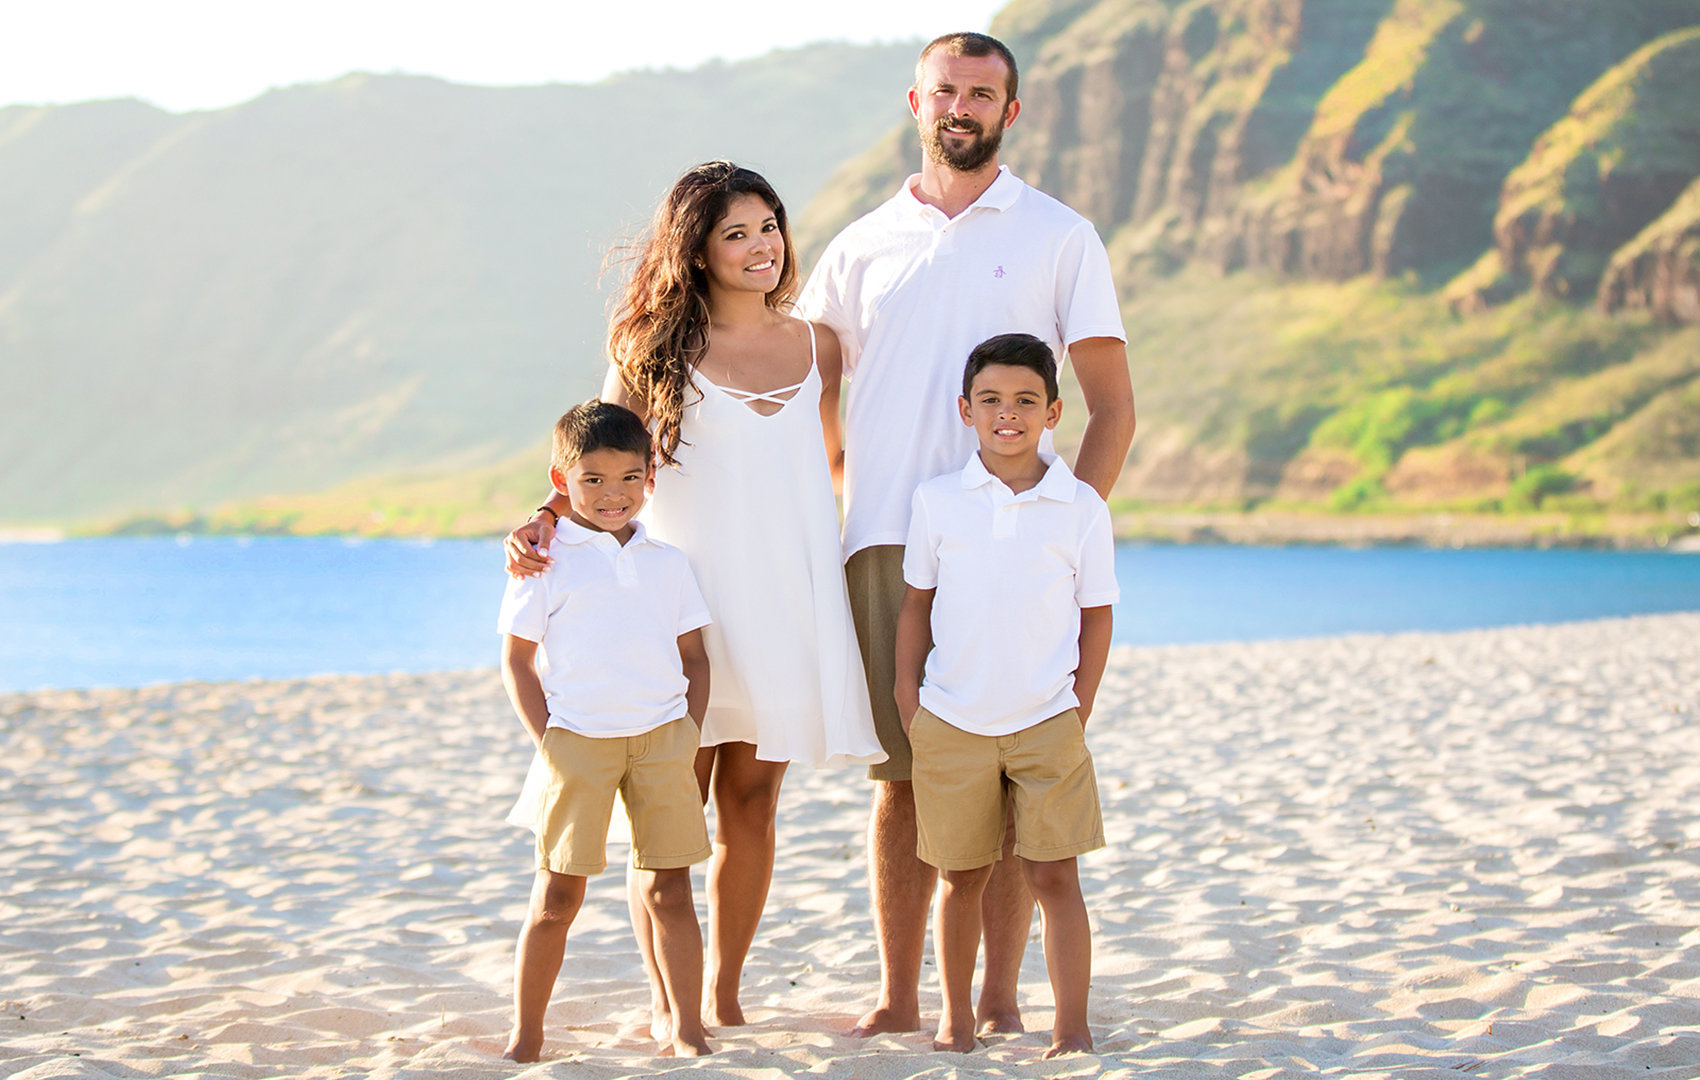 Oahu family portrait on a clear beautiful day.